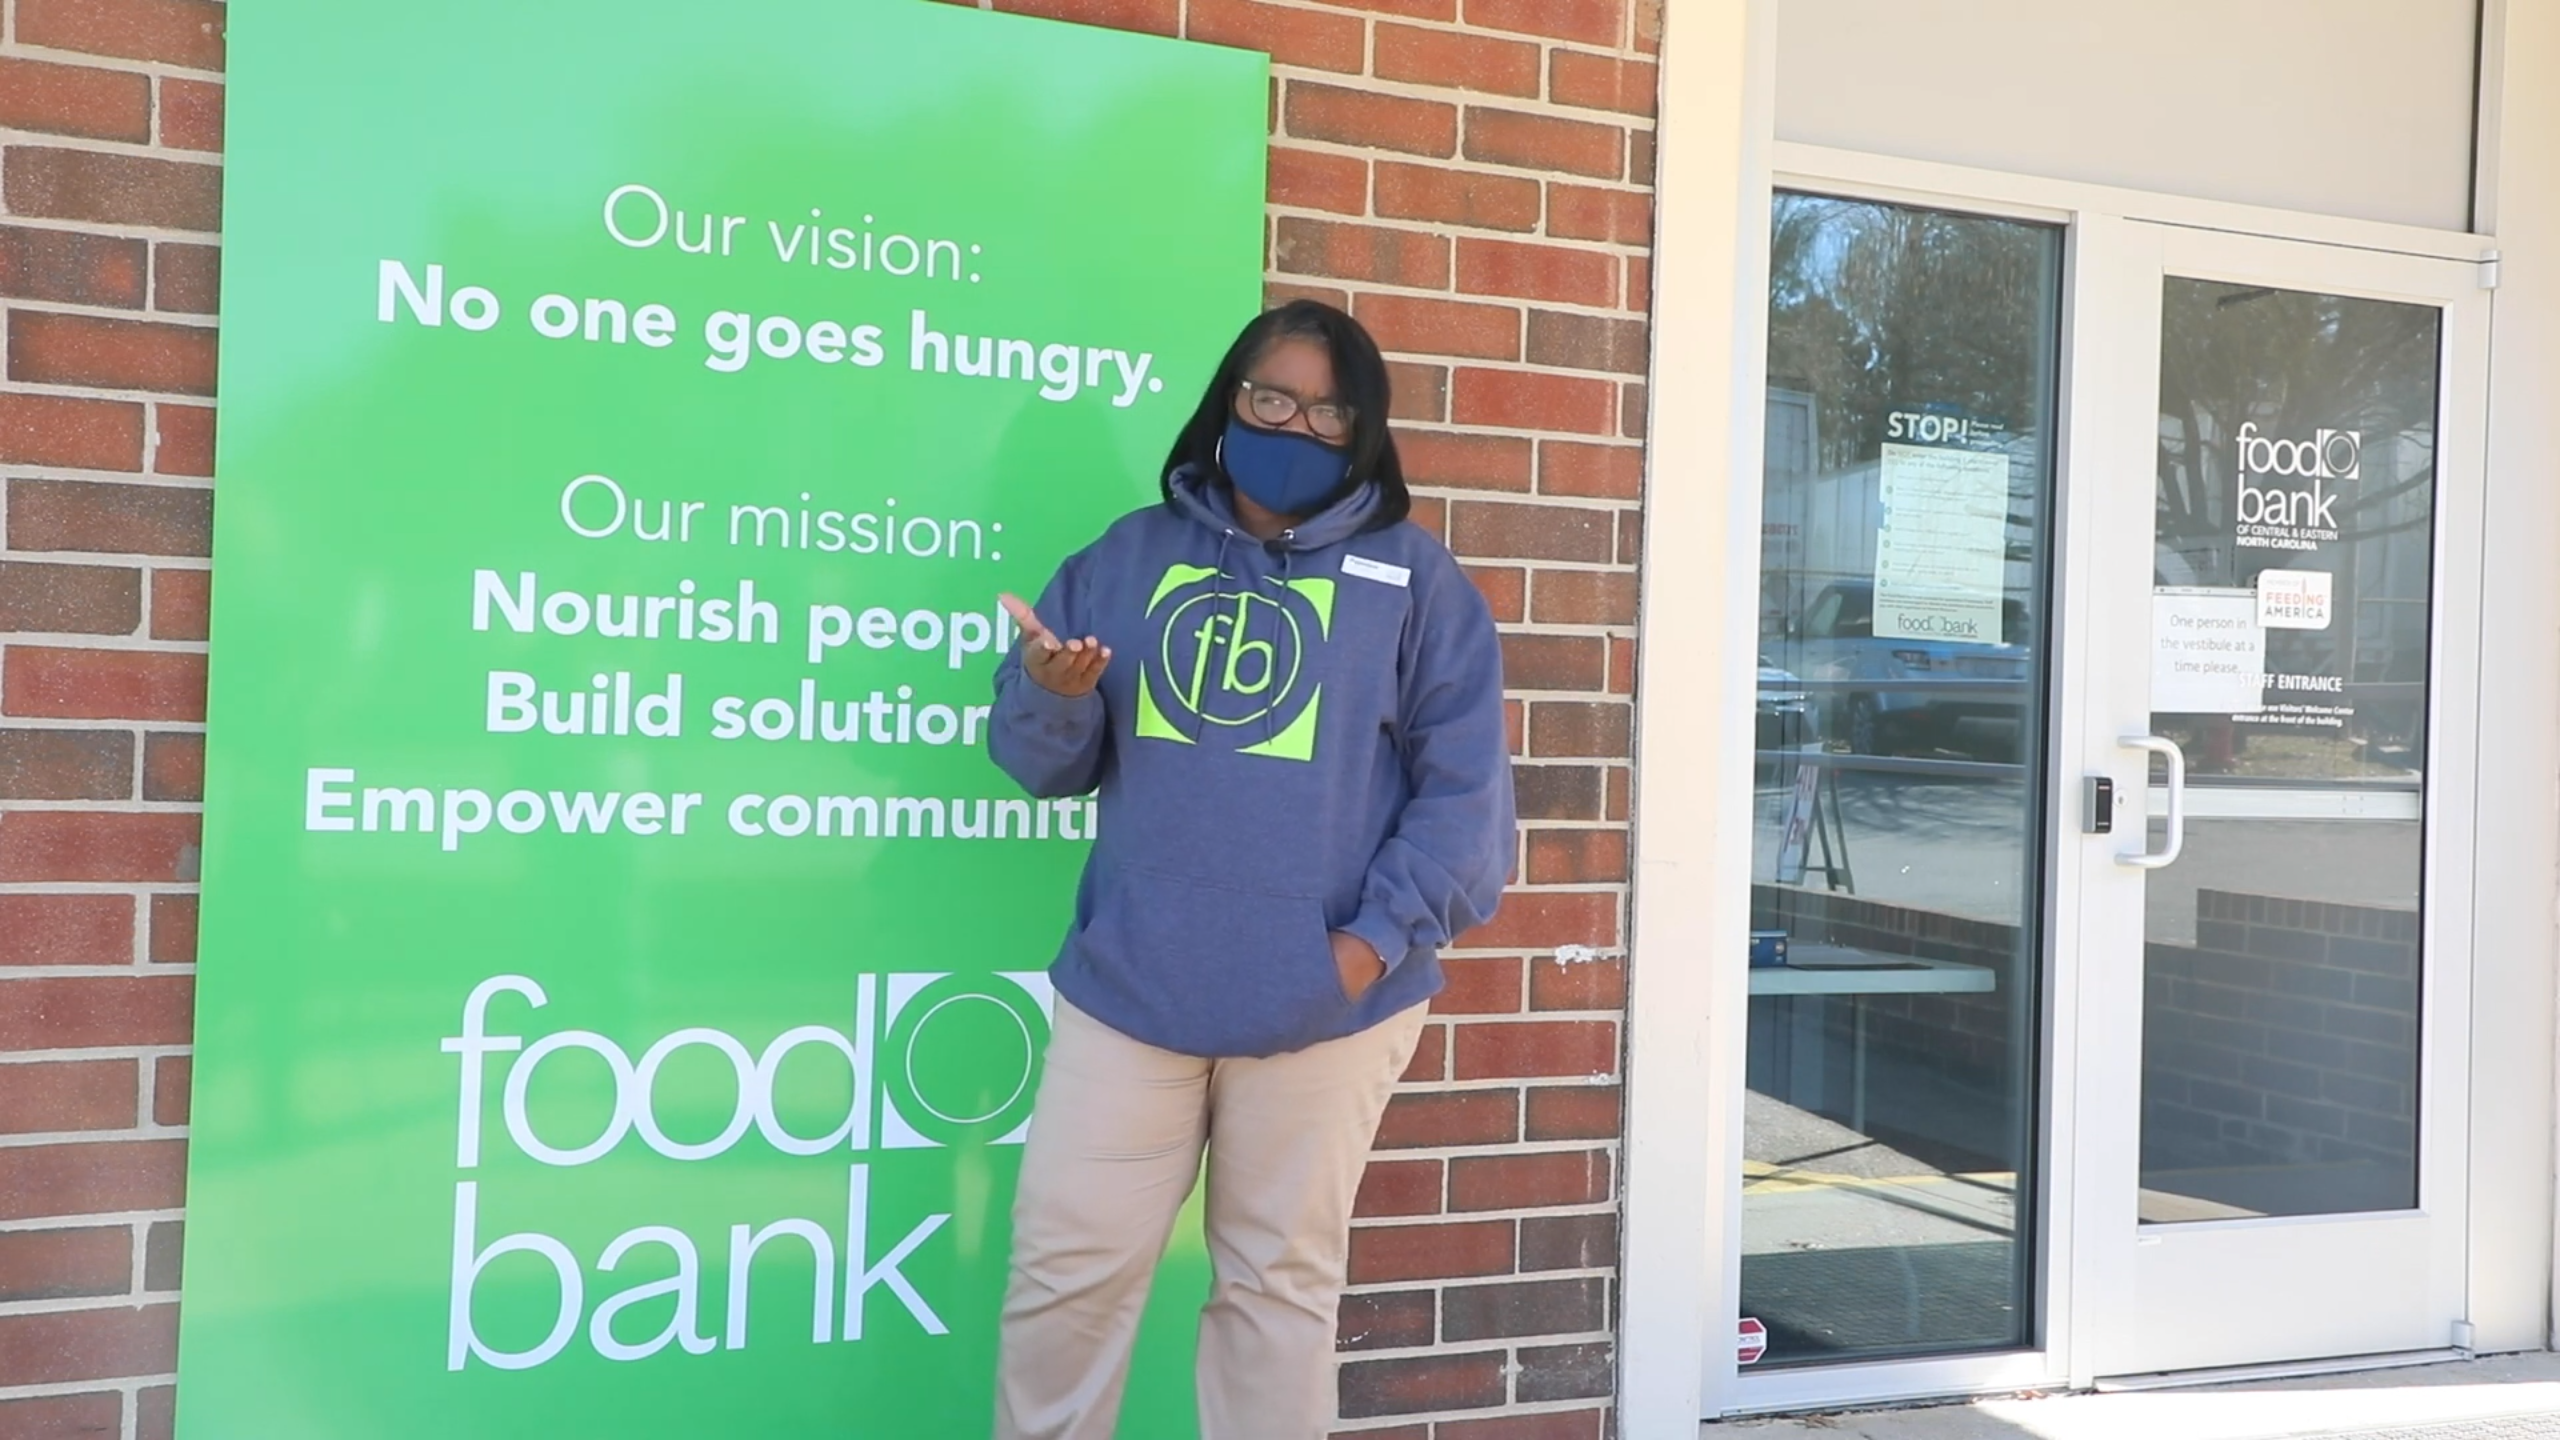 A spokesperson for the Food Bank of Central & Eastern North Carolina stands in front of a green sign for the organization